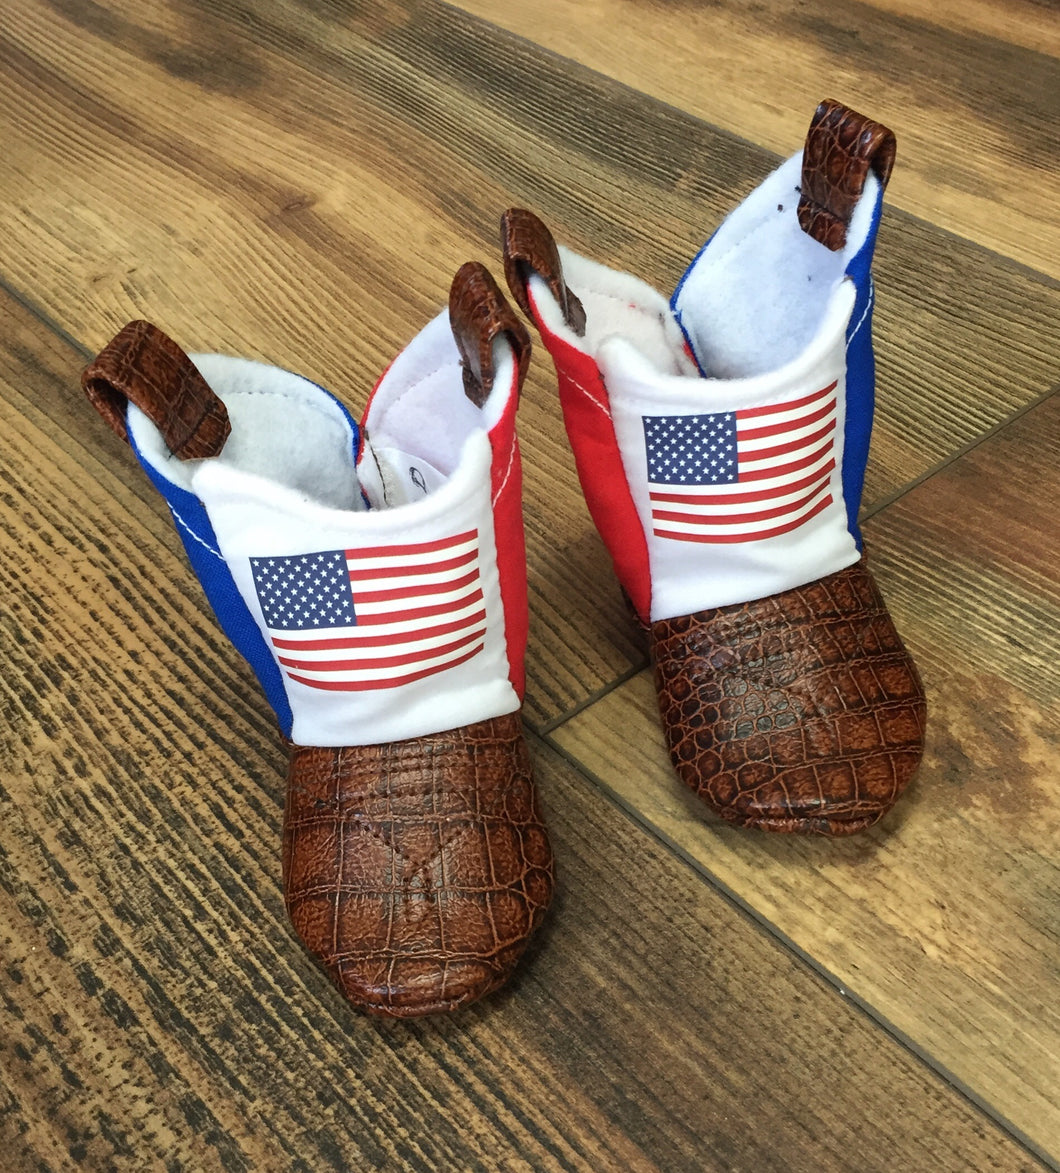 American Flag Baby Cowboy Boots | Newborn Size up to 24 Months